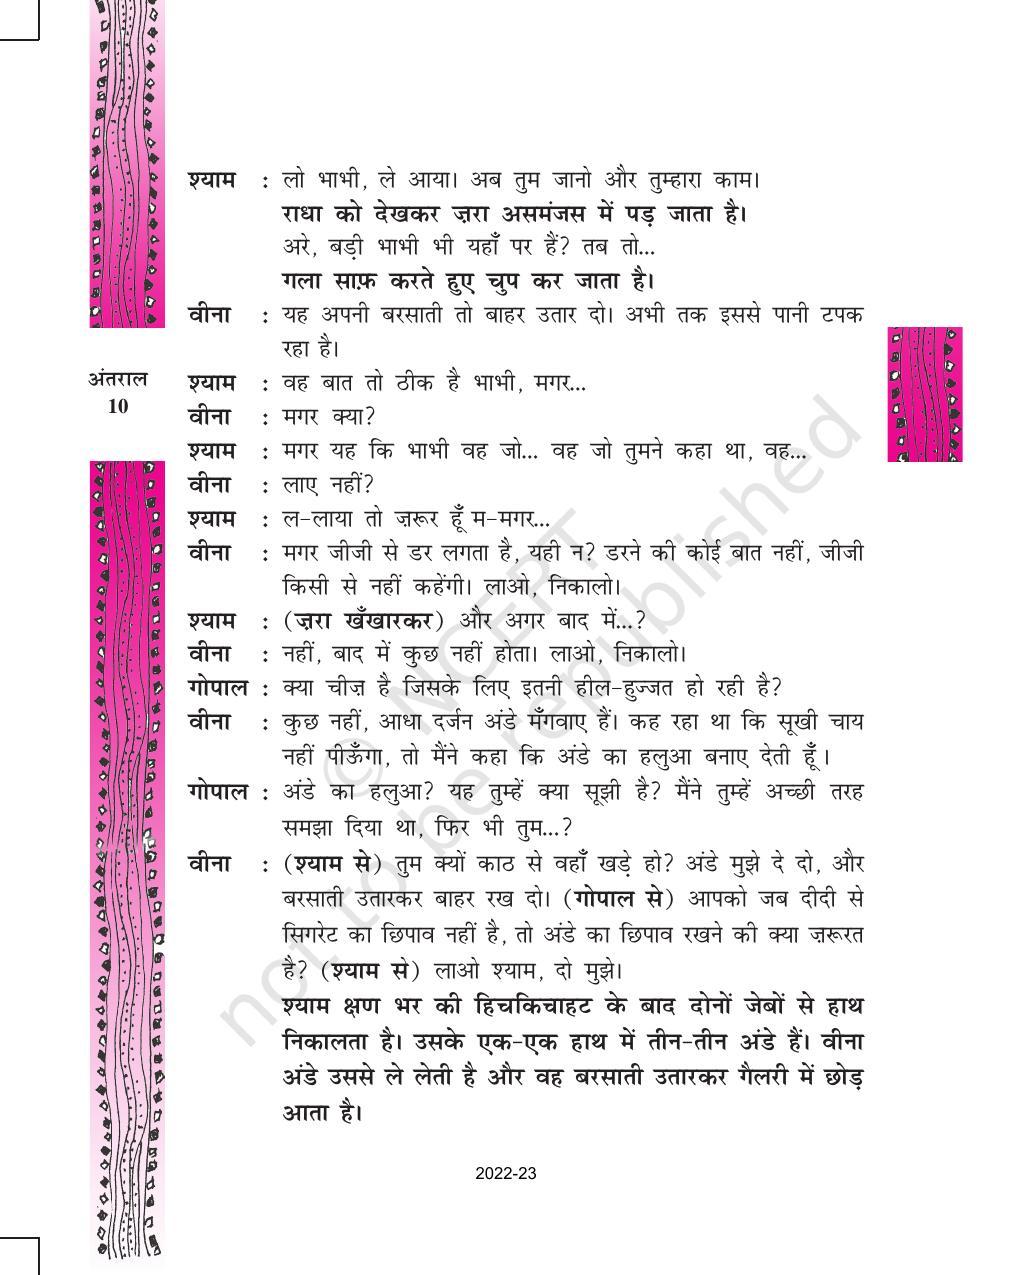 NCERT Book for Class 11 Hindi Antral Chapter 1 अंडे के छिलके - Page 10